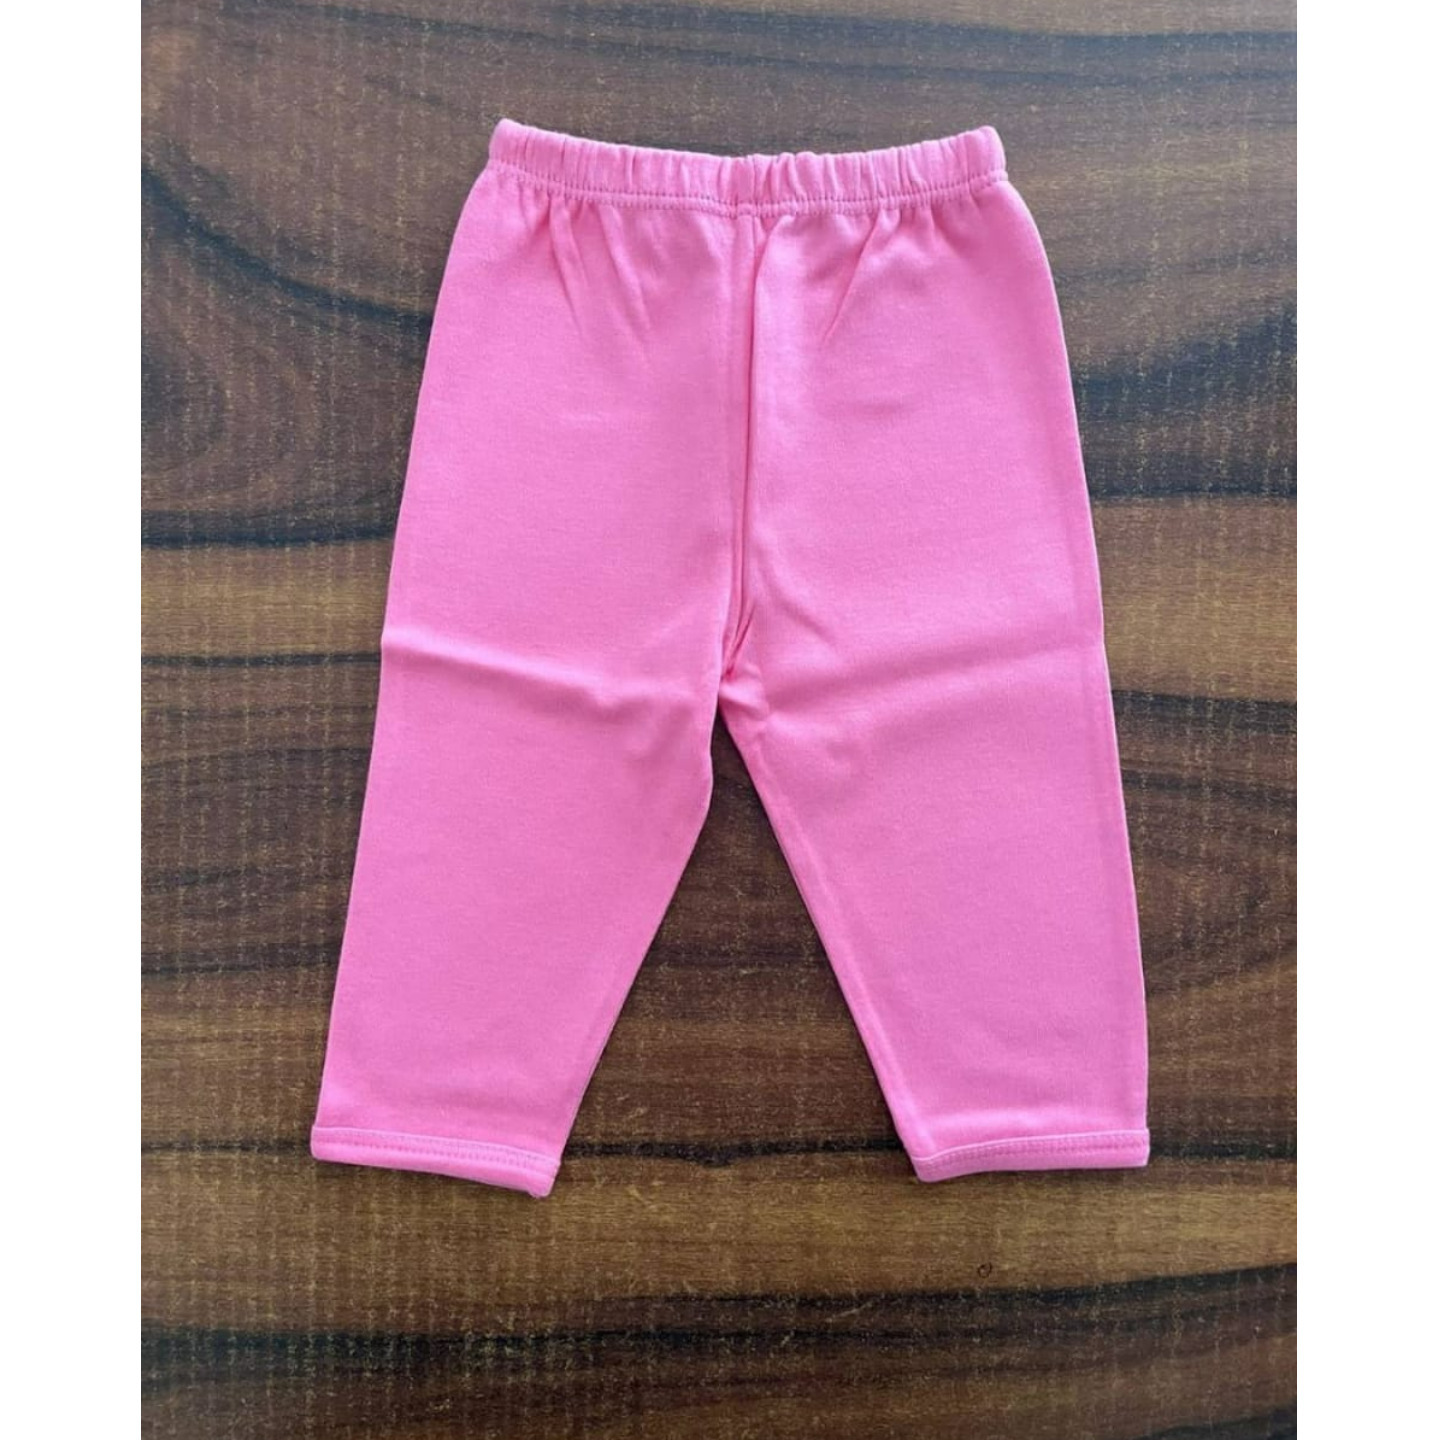 Cradle Togs Leggings New Born Size Rs 165 Only